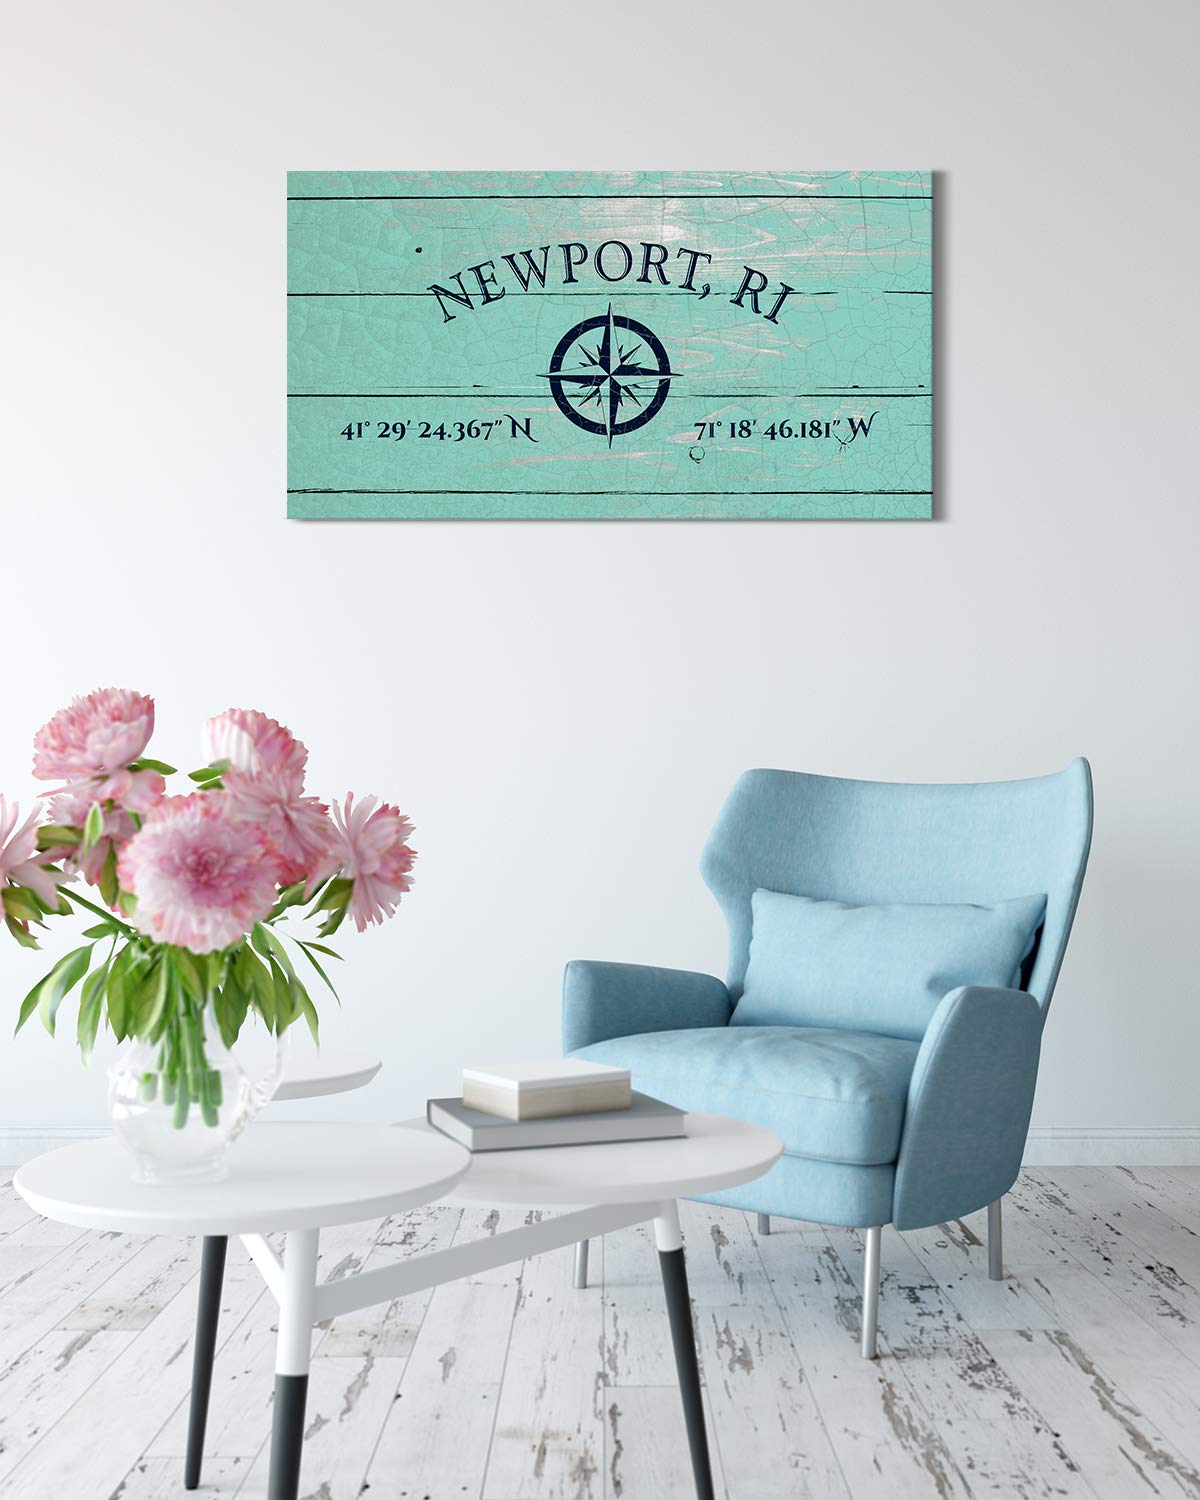 Newport, RI 41° 29' 24.367" N, 71° 18' 46.181" W - Wall Decor Art Canvas with a distressed light turquoise woodgrain background - Ready to Hang - Great for above a couch, table, bed or more